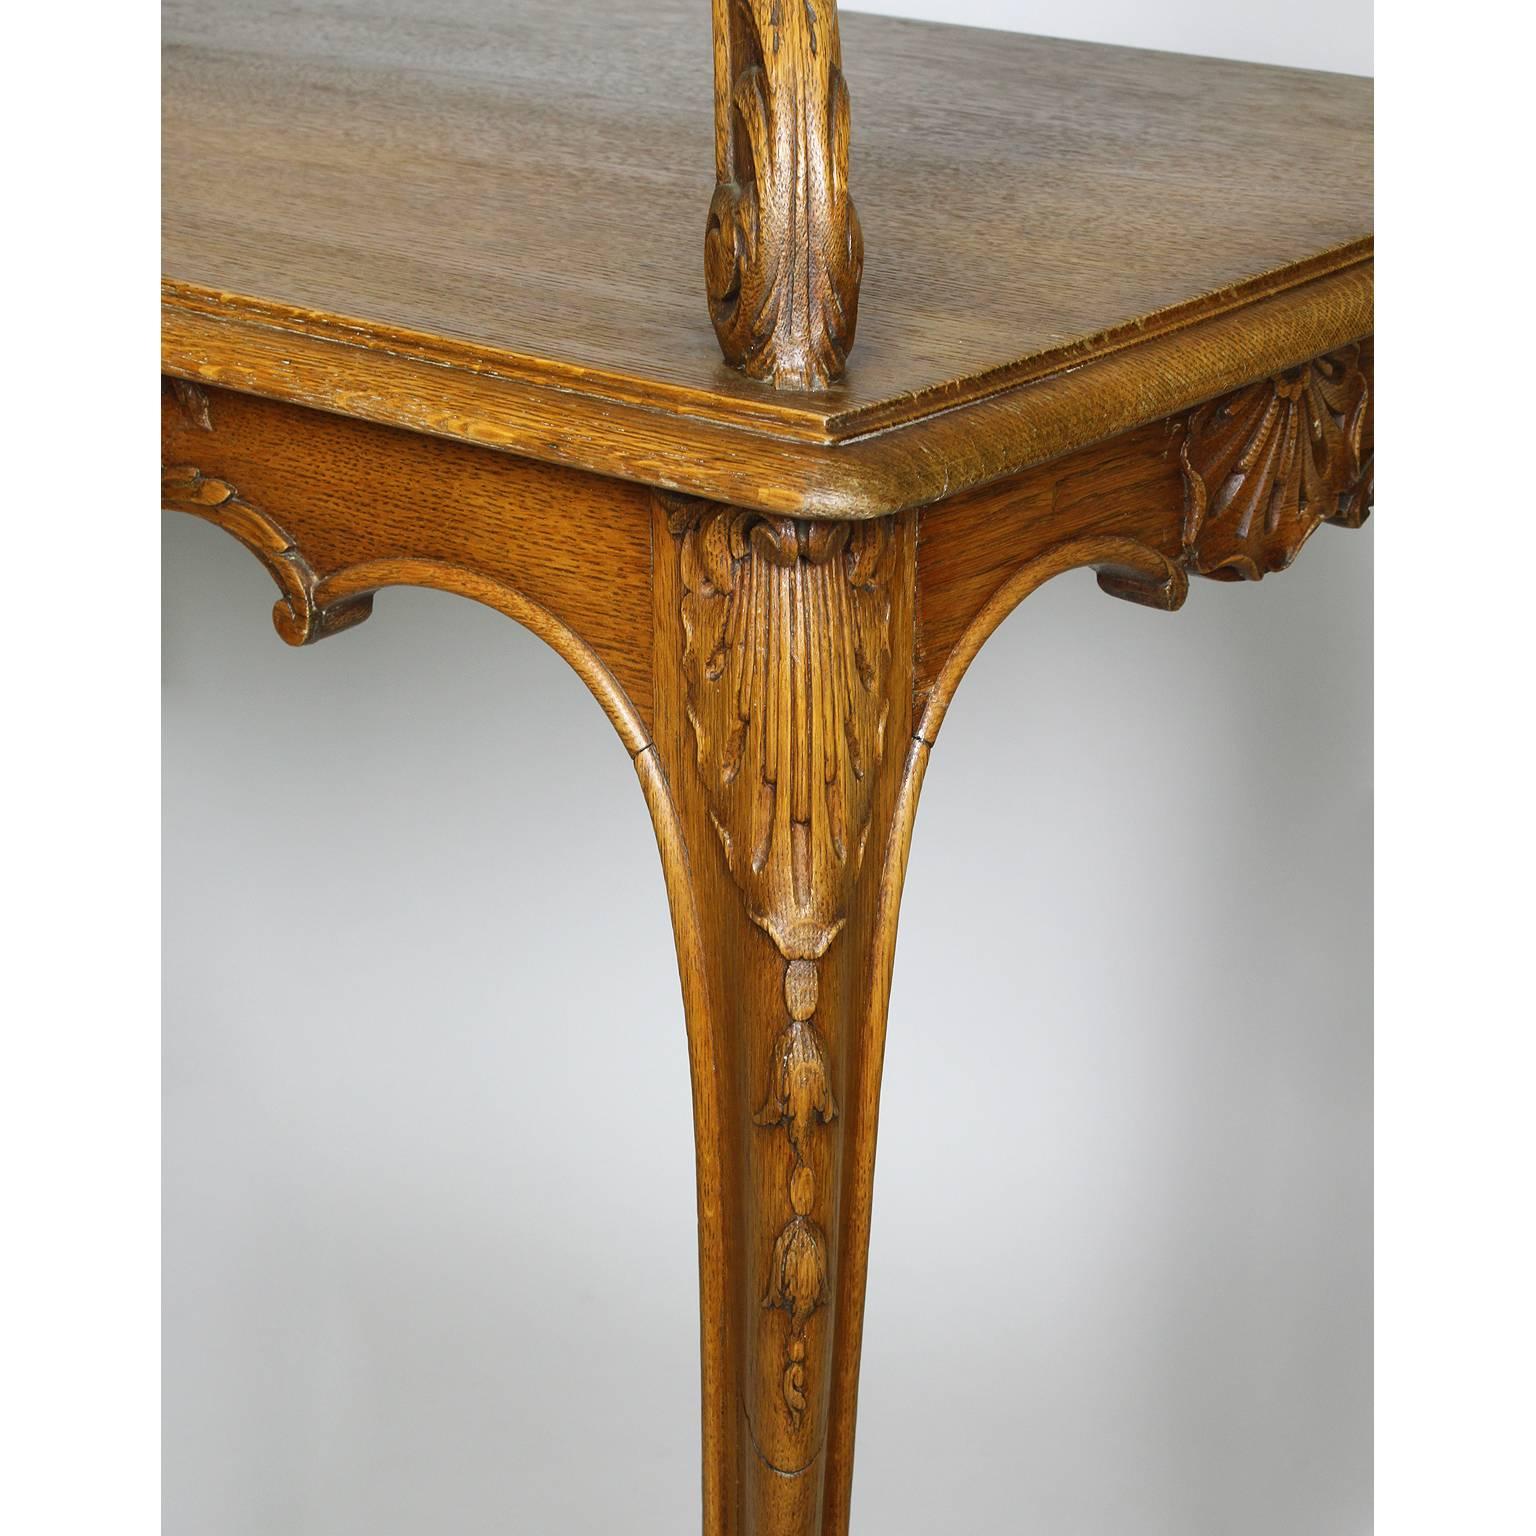 Early 20th Century French 19th-20th Century Louis XV Style Carved Oak Two-Tier Tea or Dessert Table For Sale